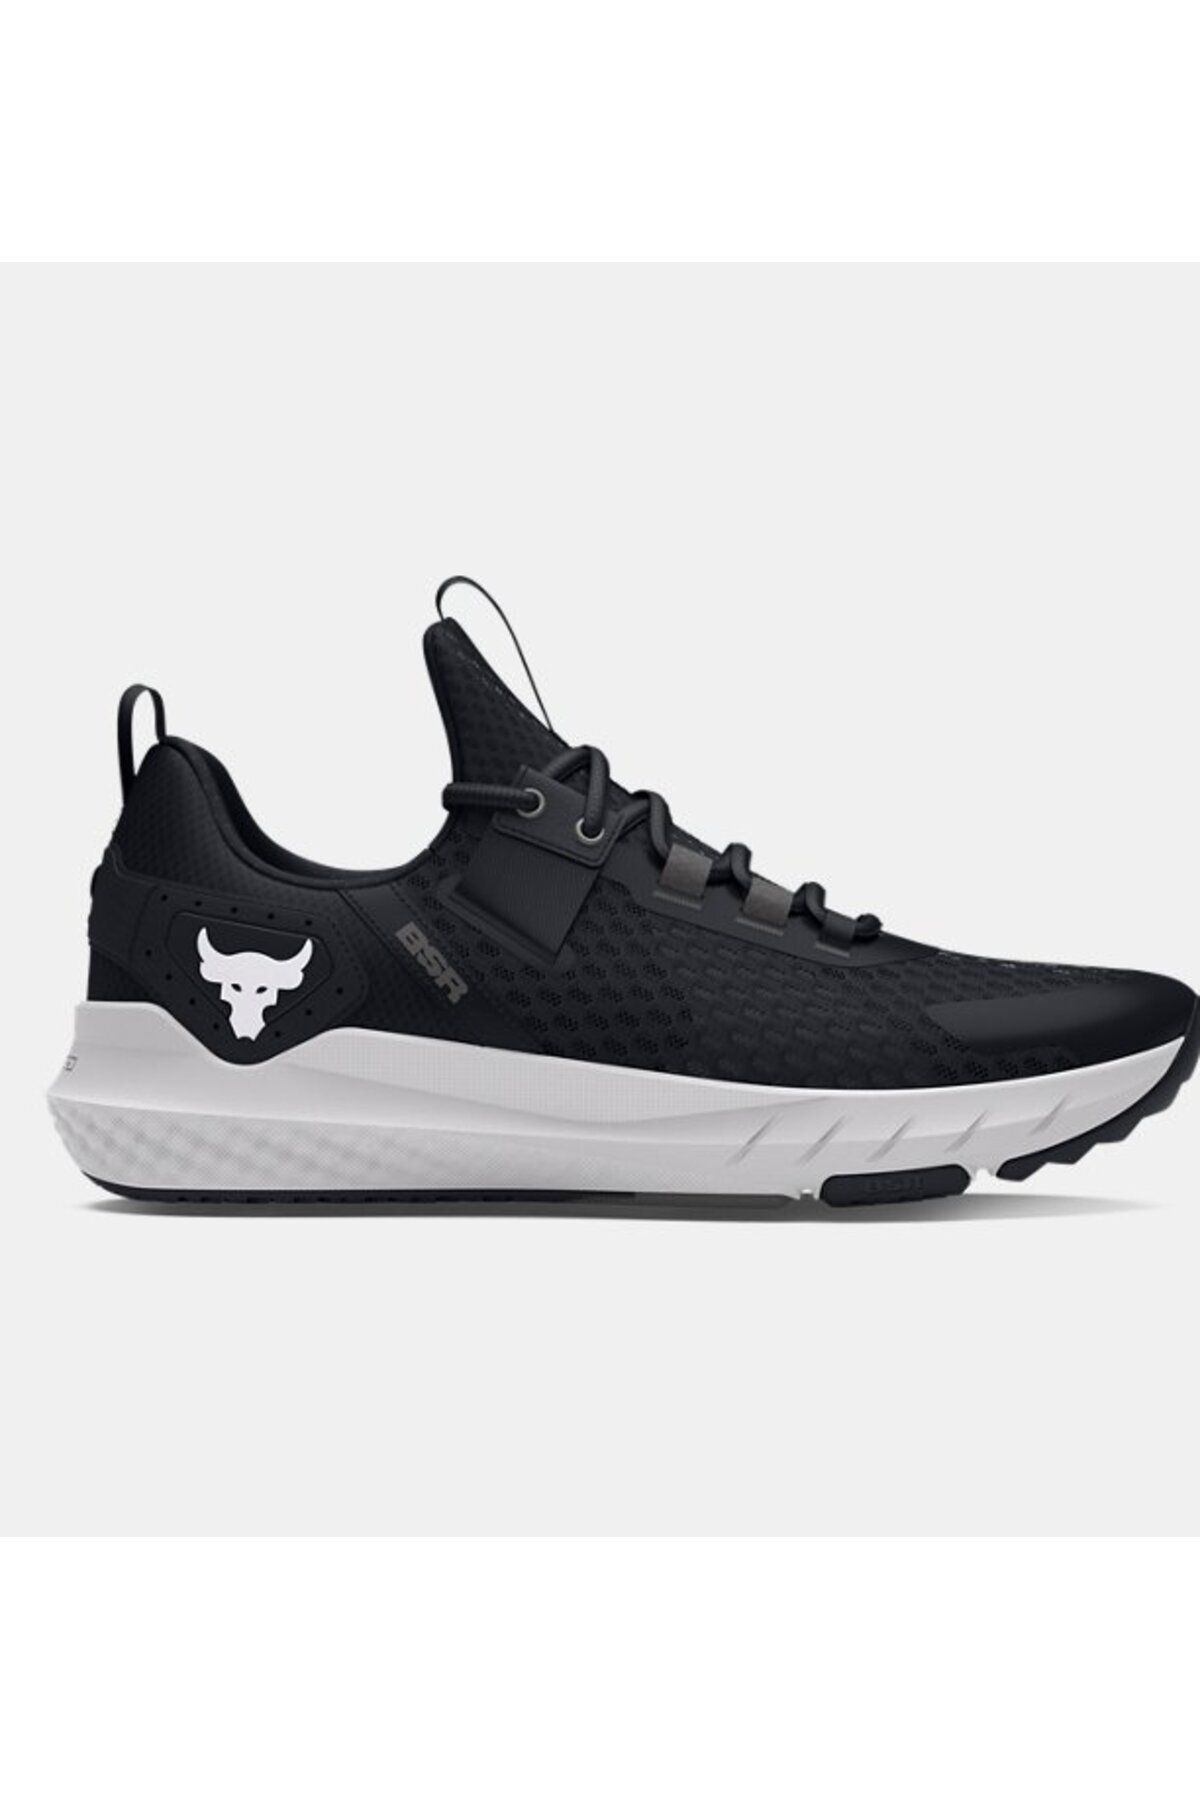 Under Armour UA Project Rock BSR 4 3027344-001